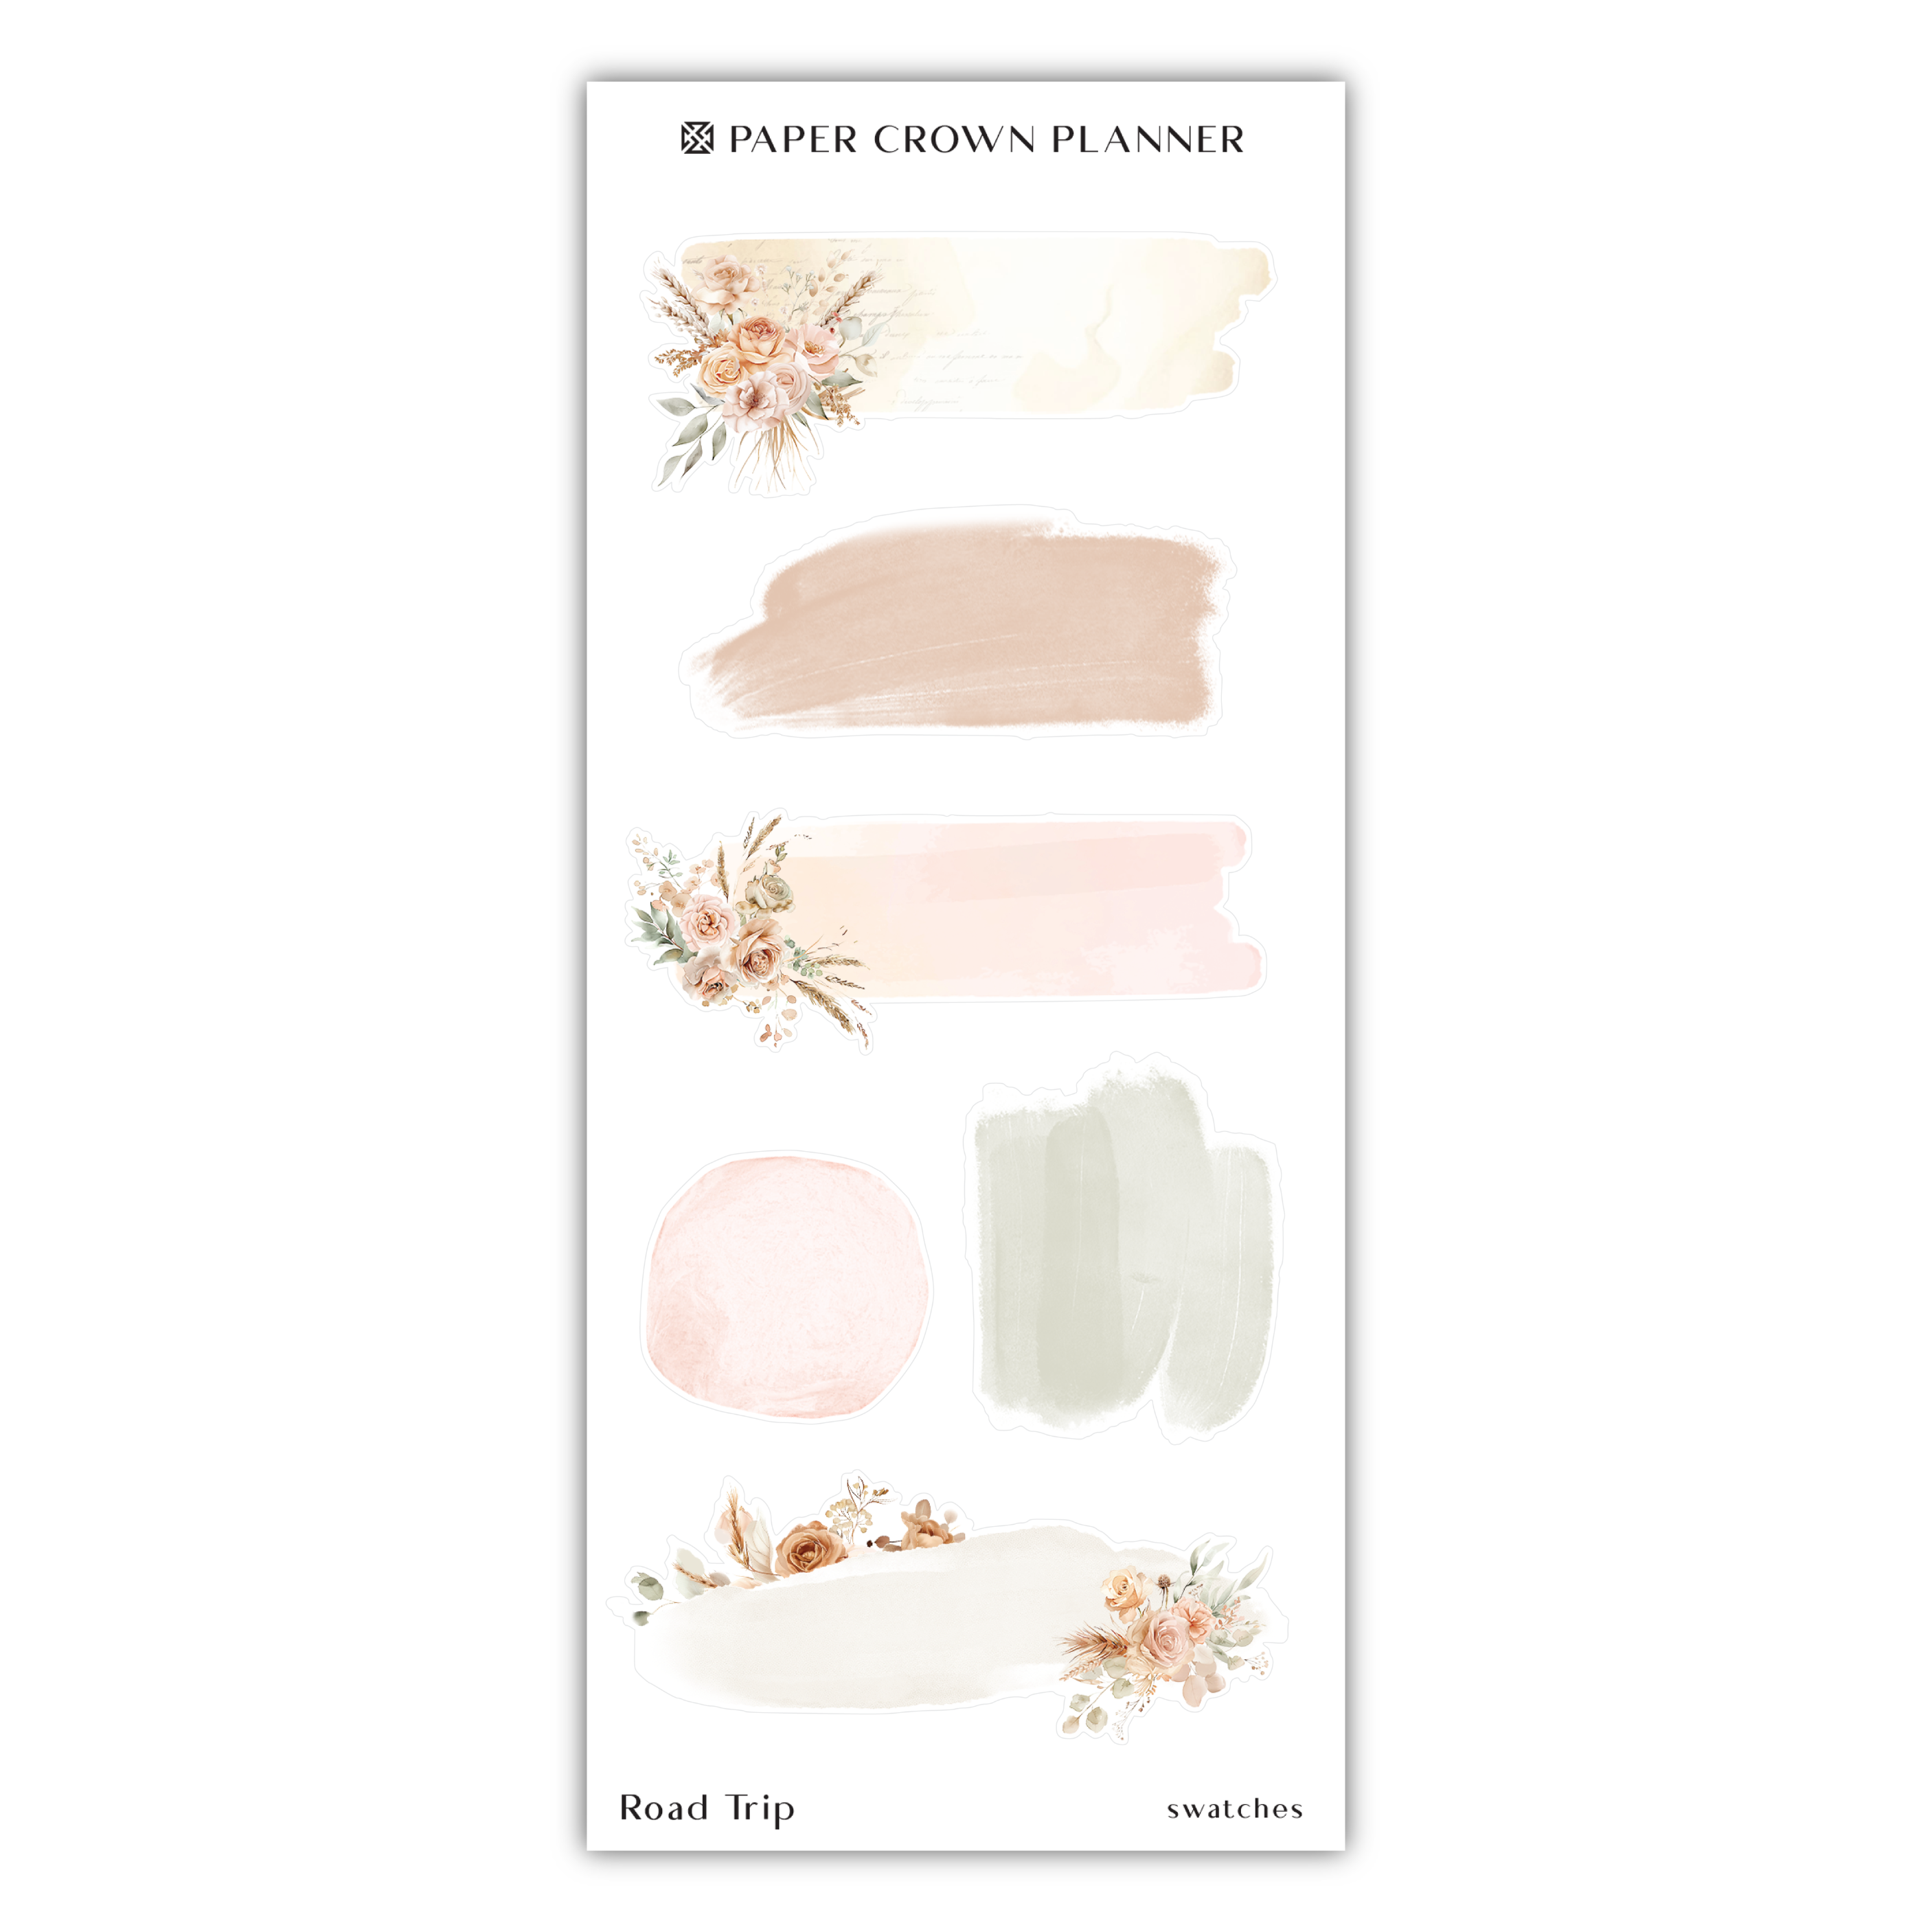 the paper crown planner stickers are shown in various shades of pink, peach and